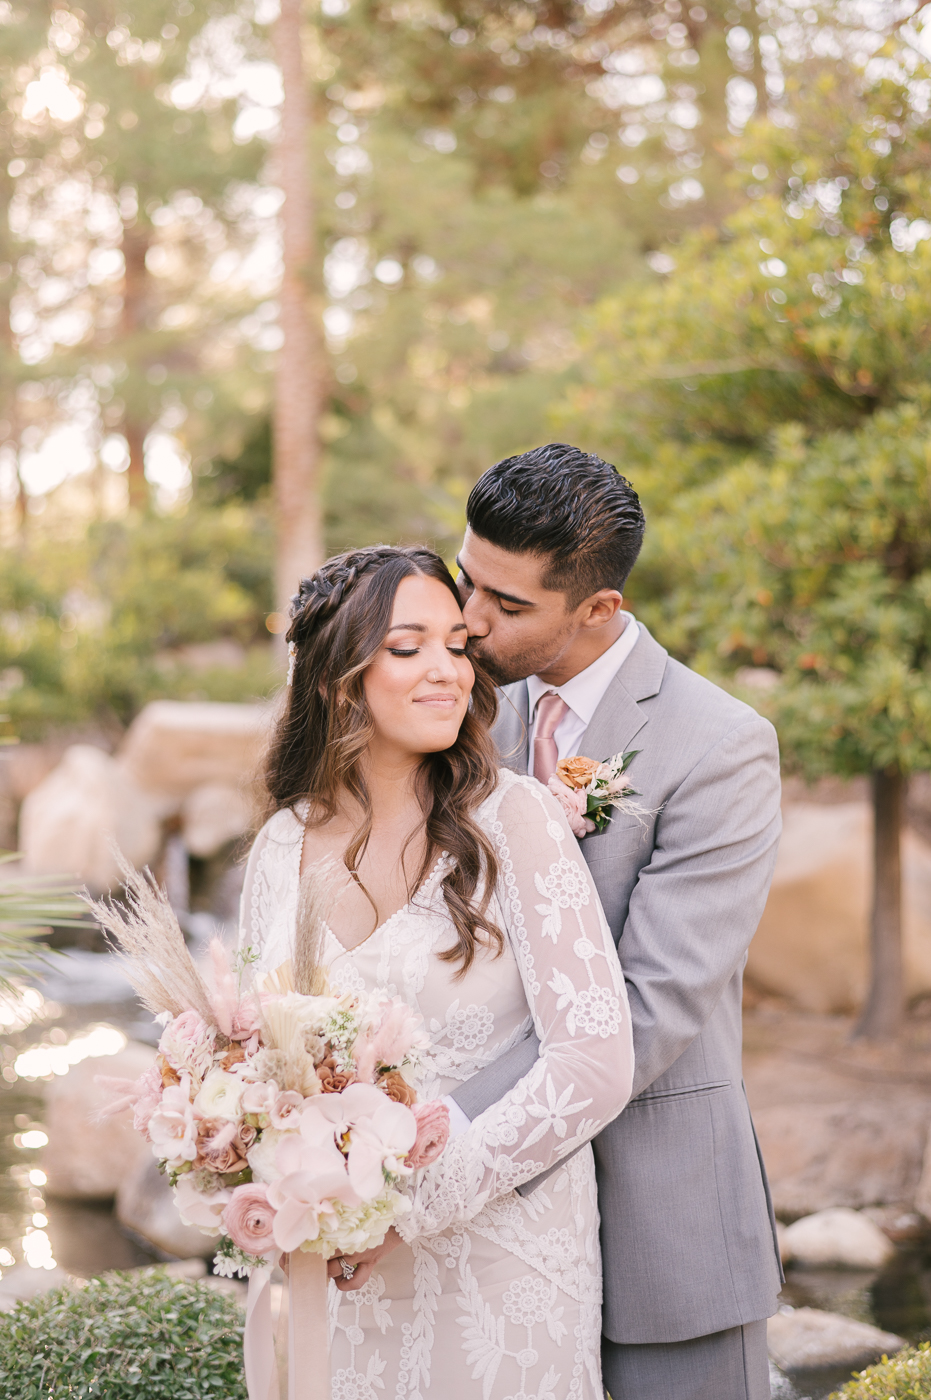 Springtime Feels for Danielle and Steven's Elopement at JW